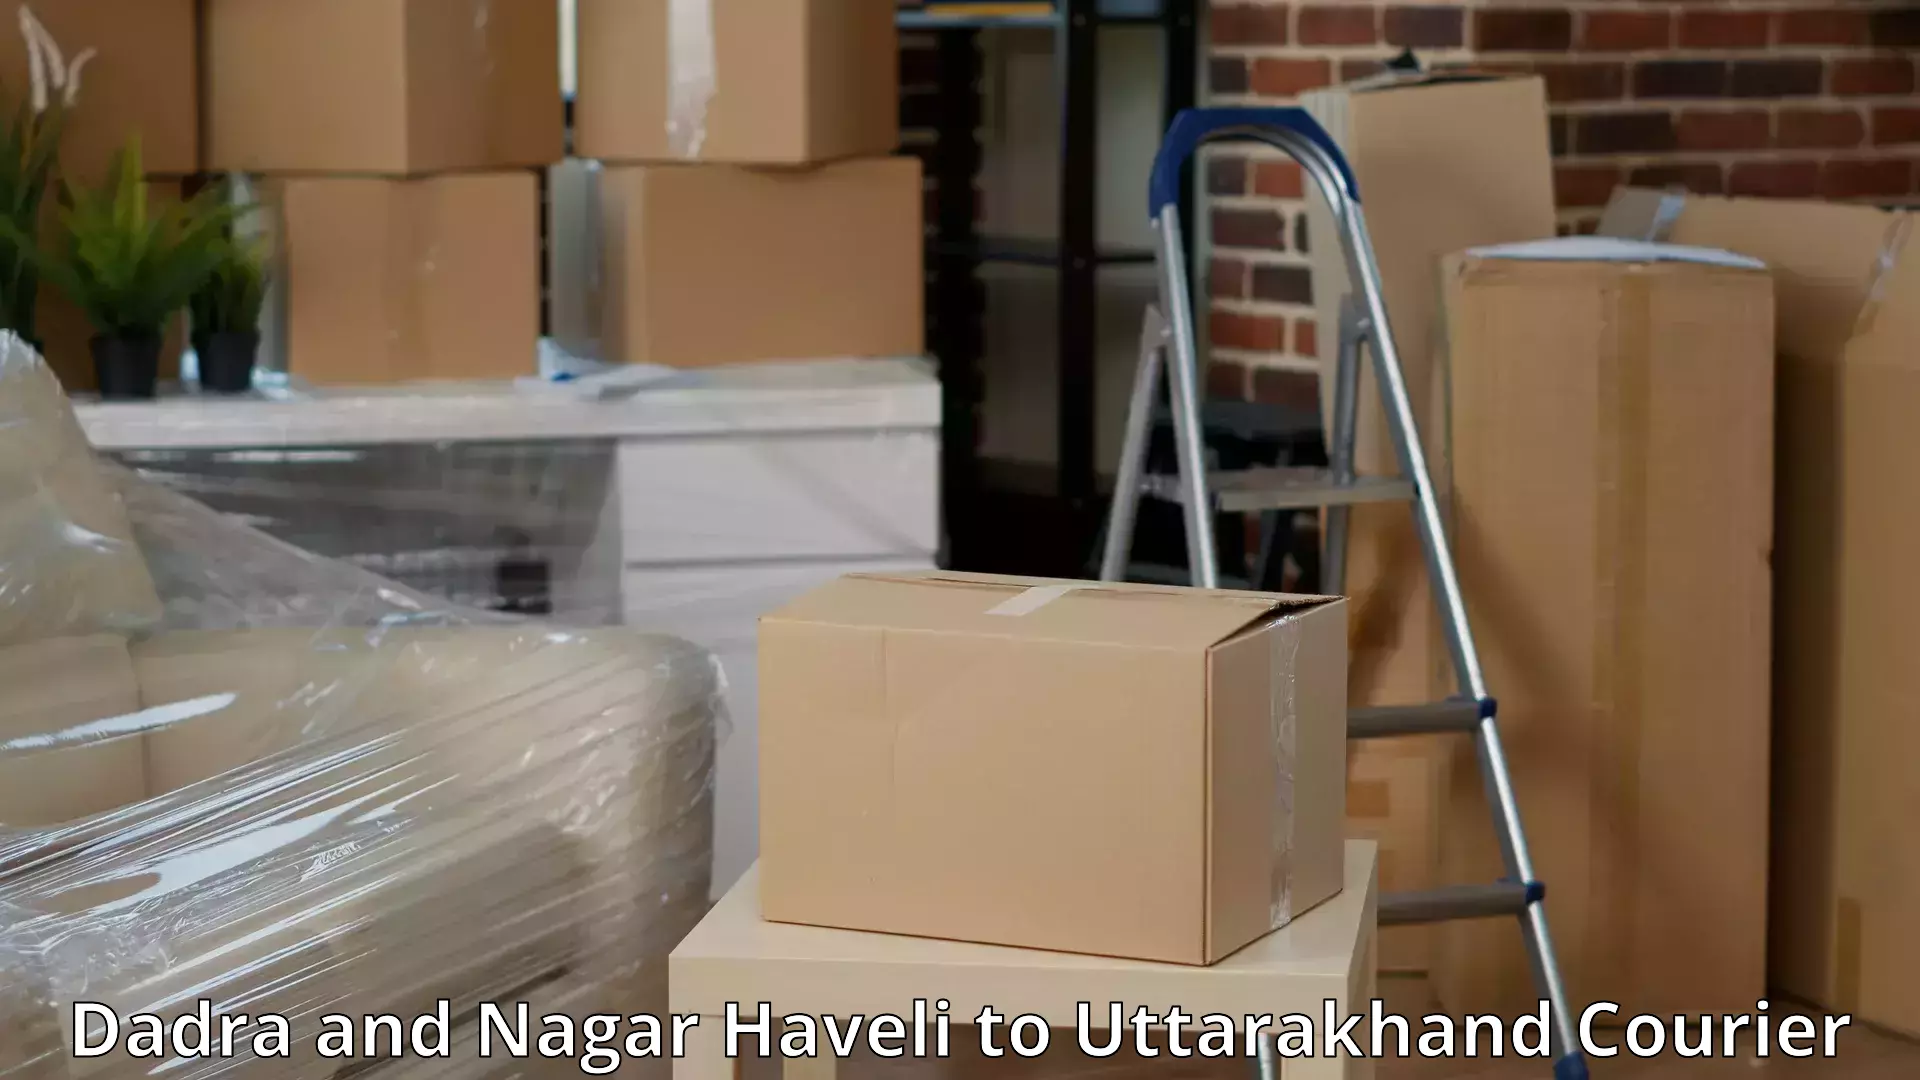 Expert goods movers in Dadra and Nagar Haveli to Bhimtal